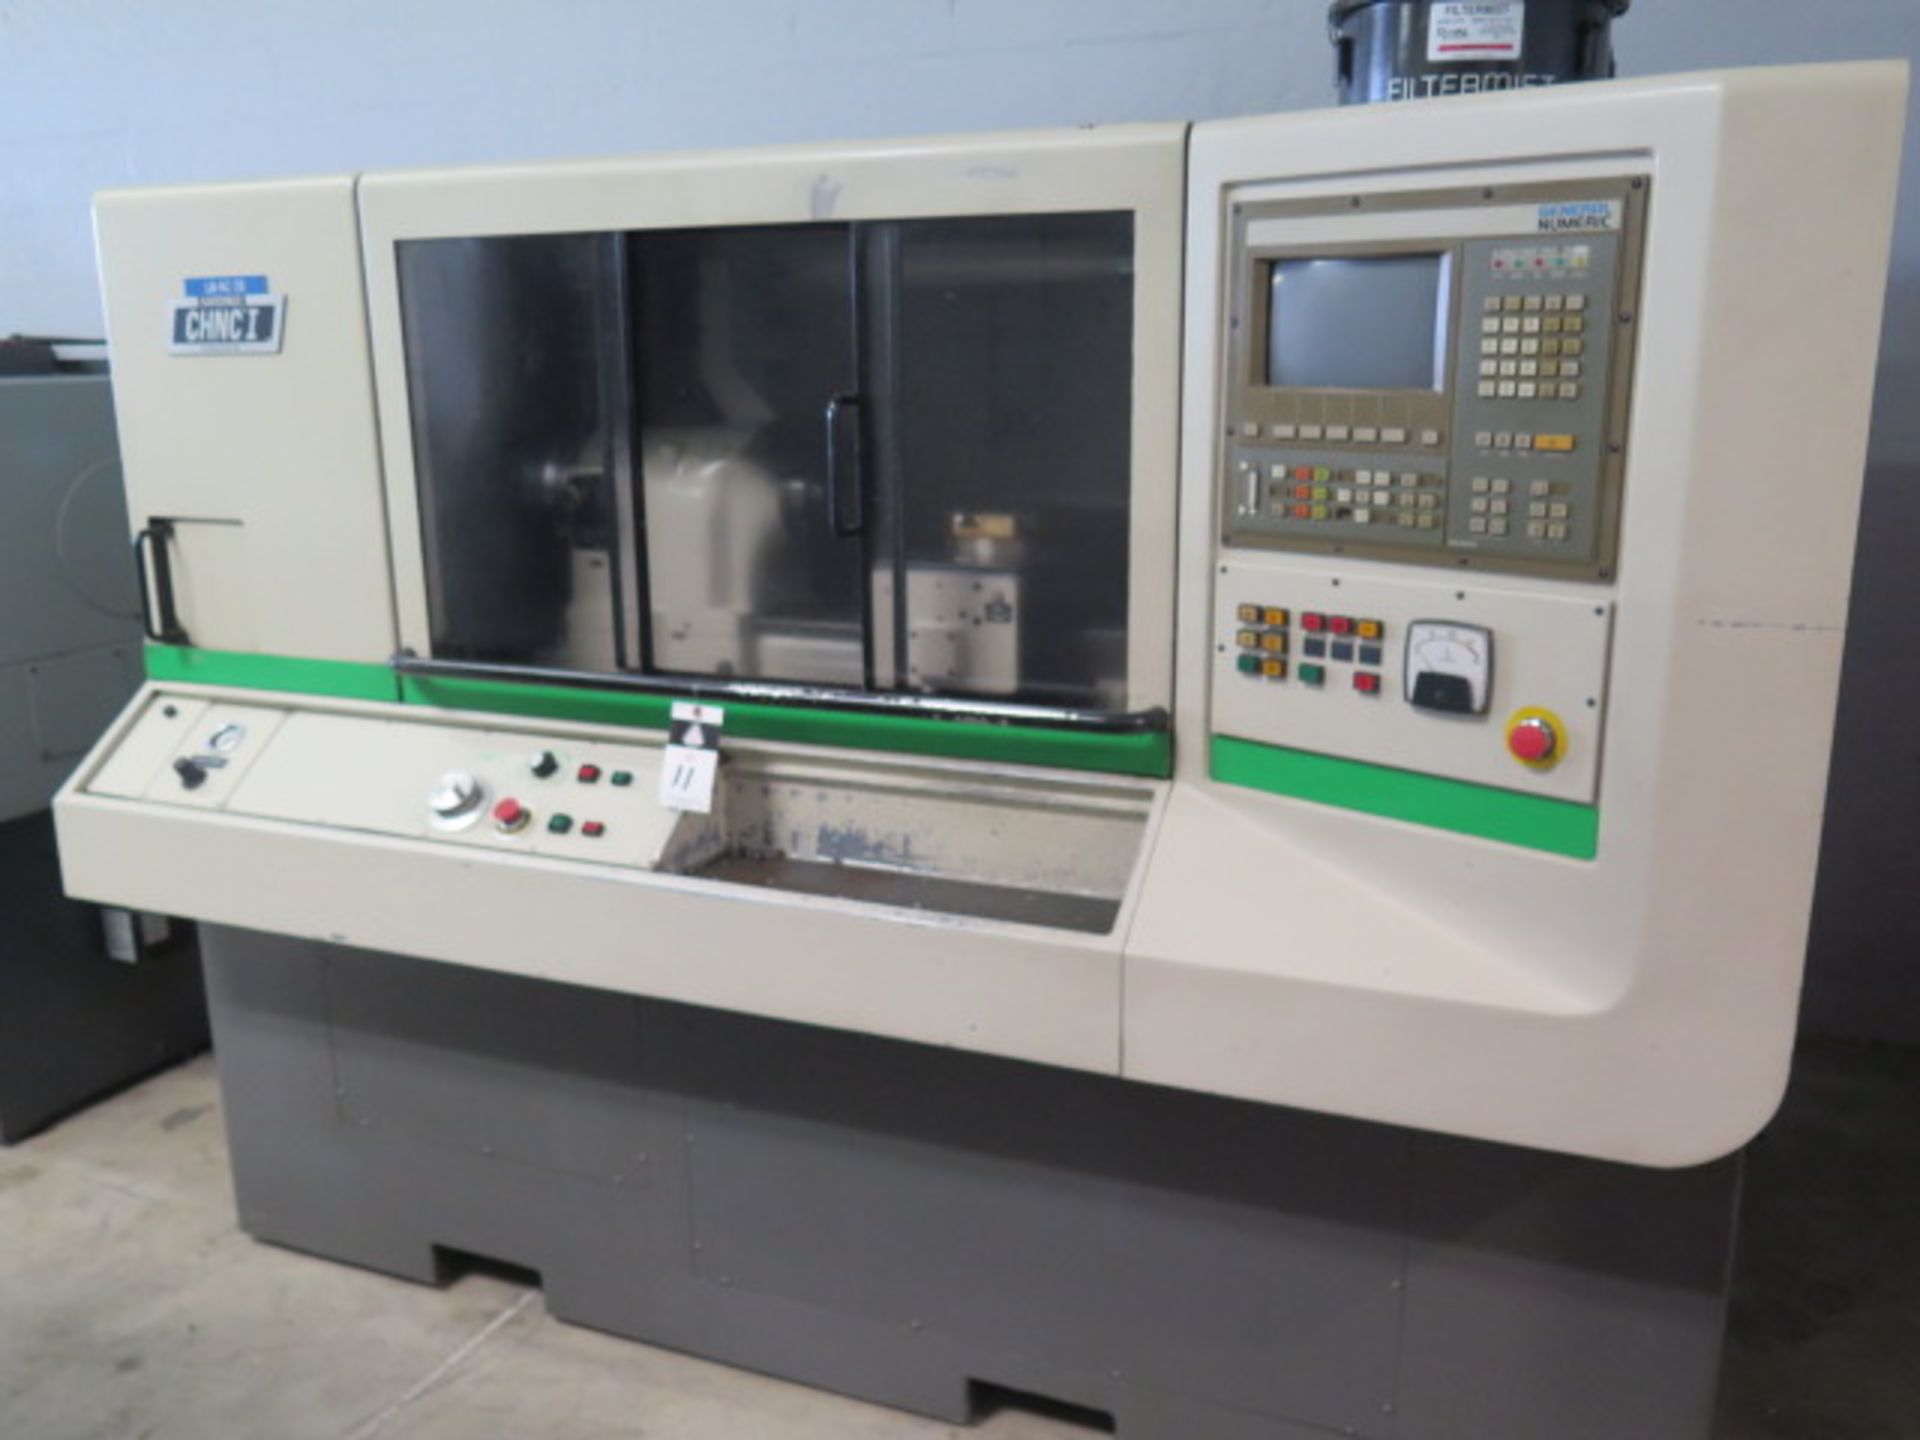 Hardinge CHNC I CNC Chucker s/n CN-2541-S w/ General Numeric Siemens Controls, 8-Station, SOLD AS IS - Image 2 of 14